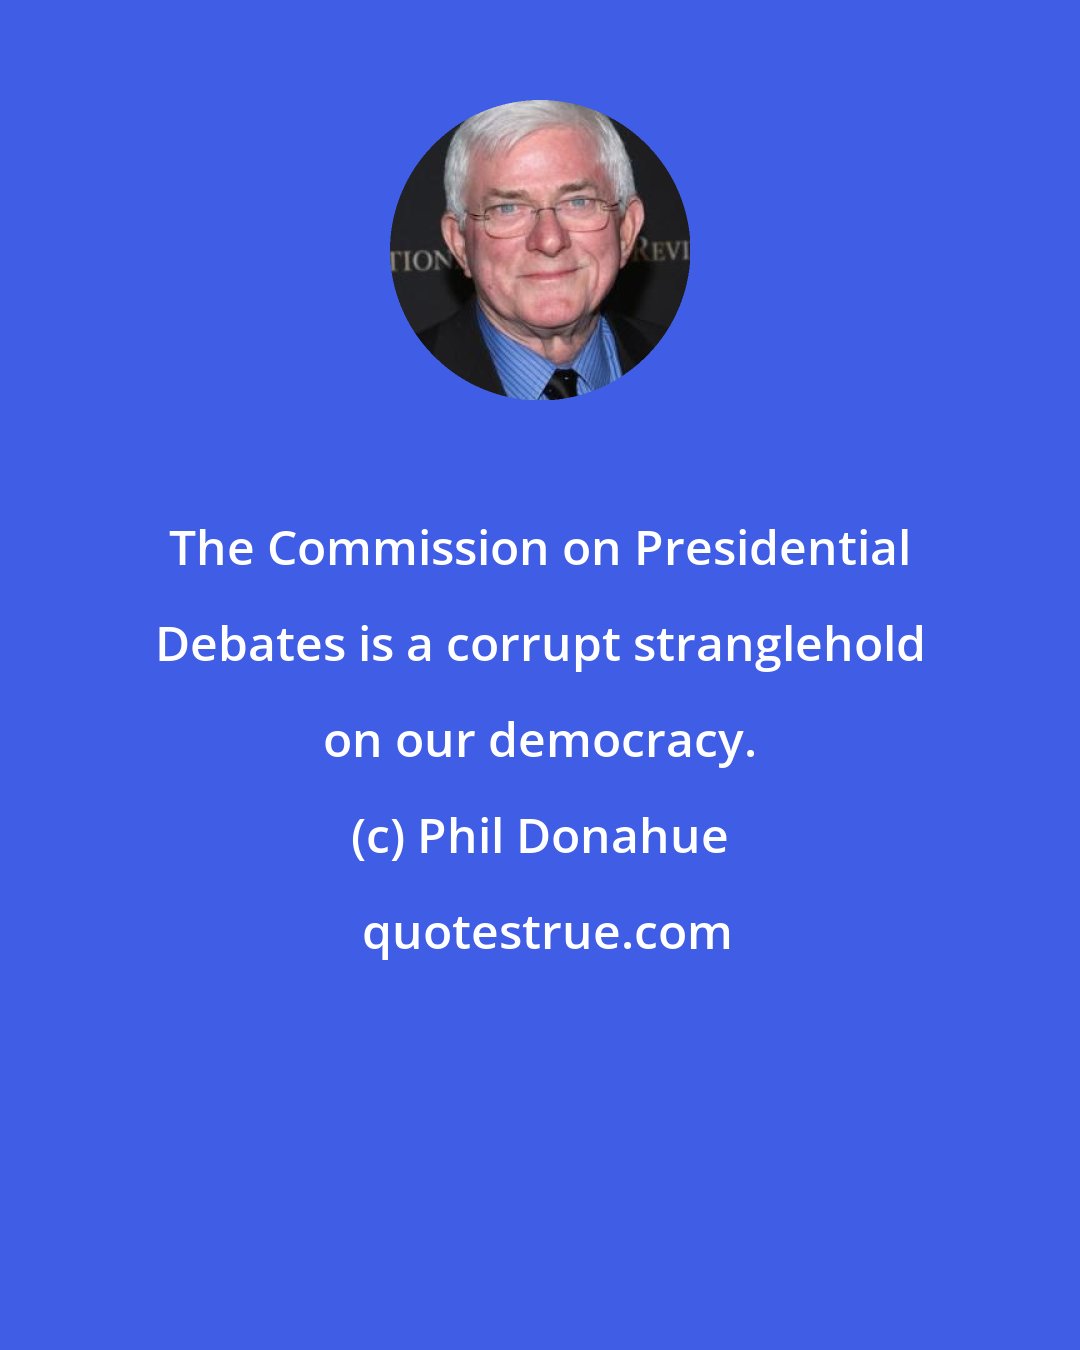 Phil Donahue: The Commission on Presidential Debates is a corrupt stranglehold on our democracy.